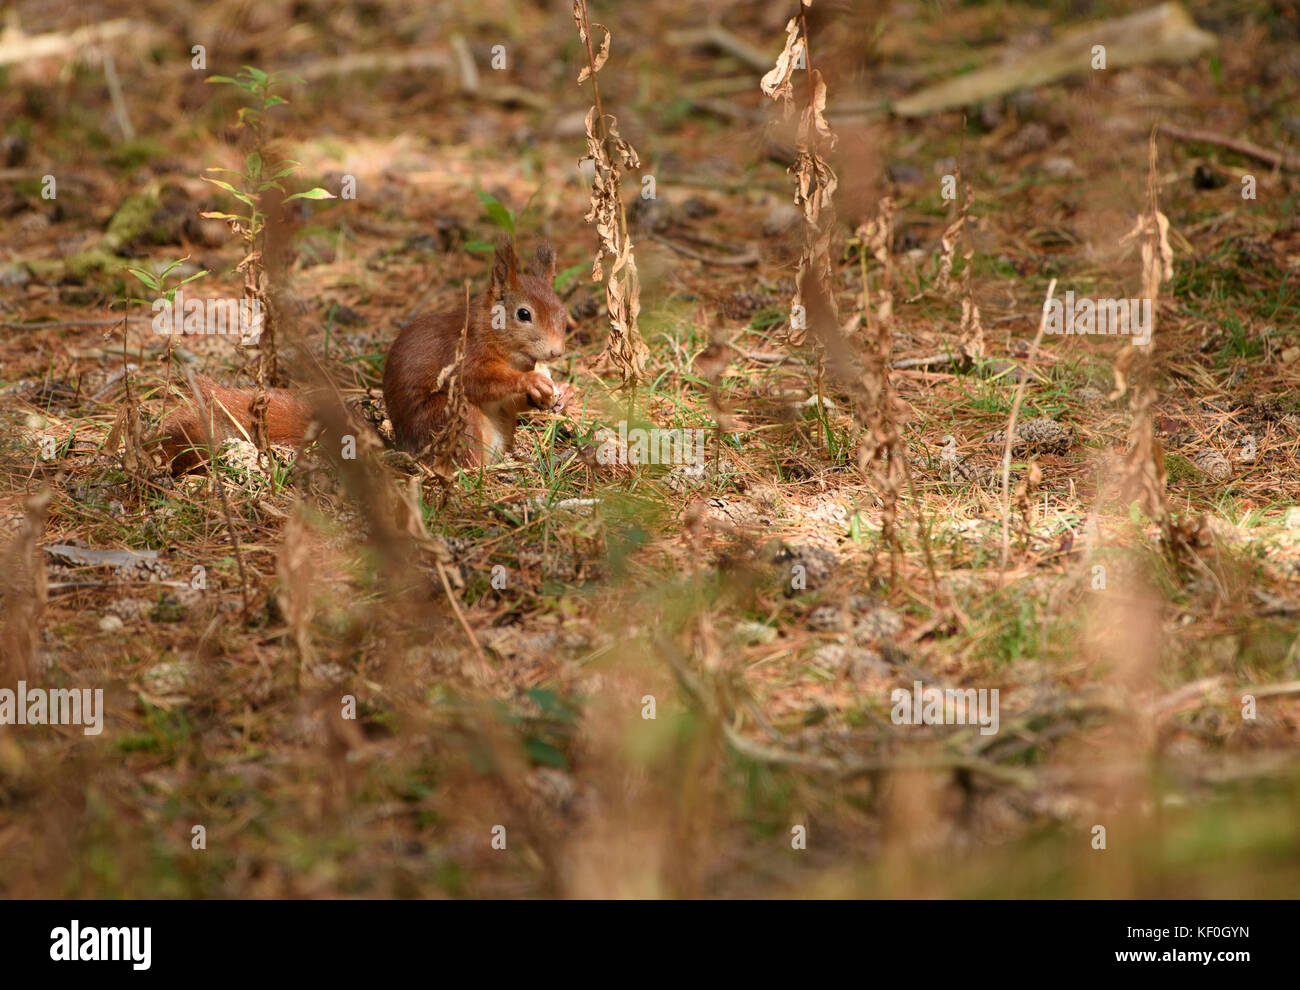 A Red Squirrel at Formby, Sefton, Merseyside. Stock Photo